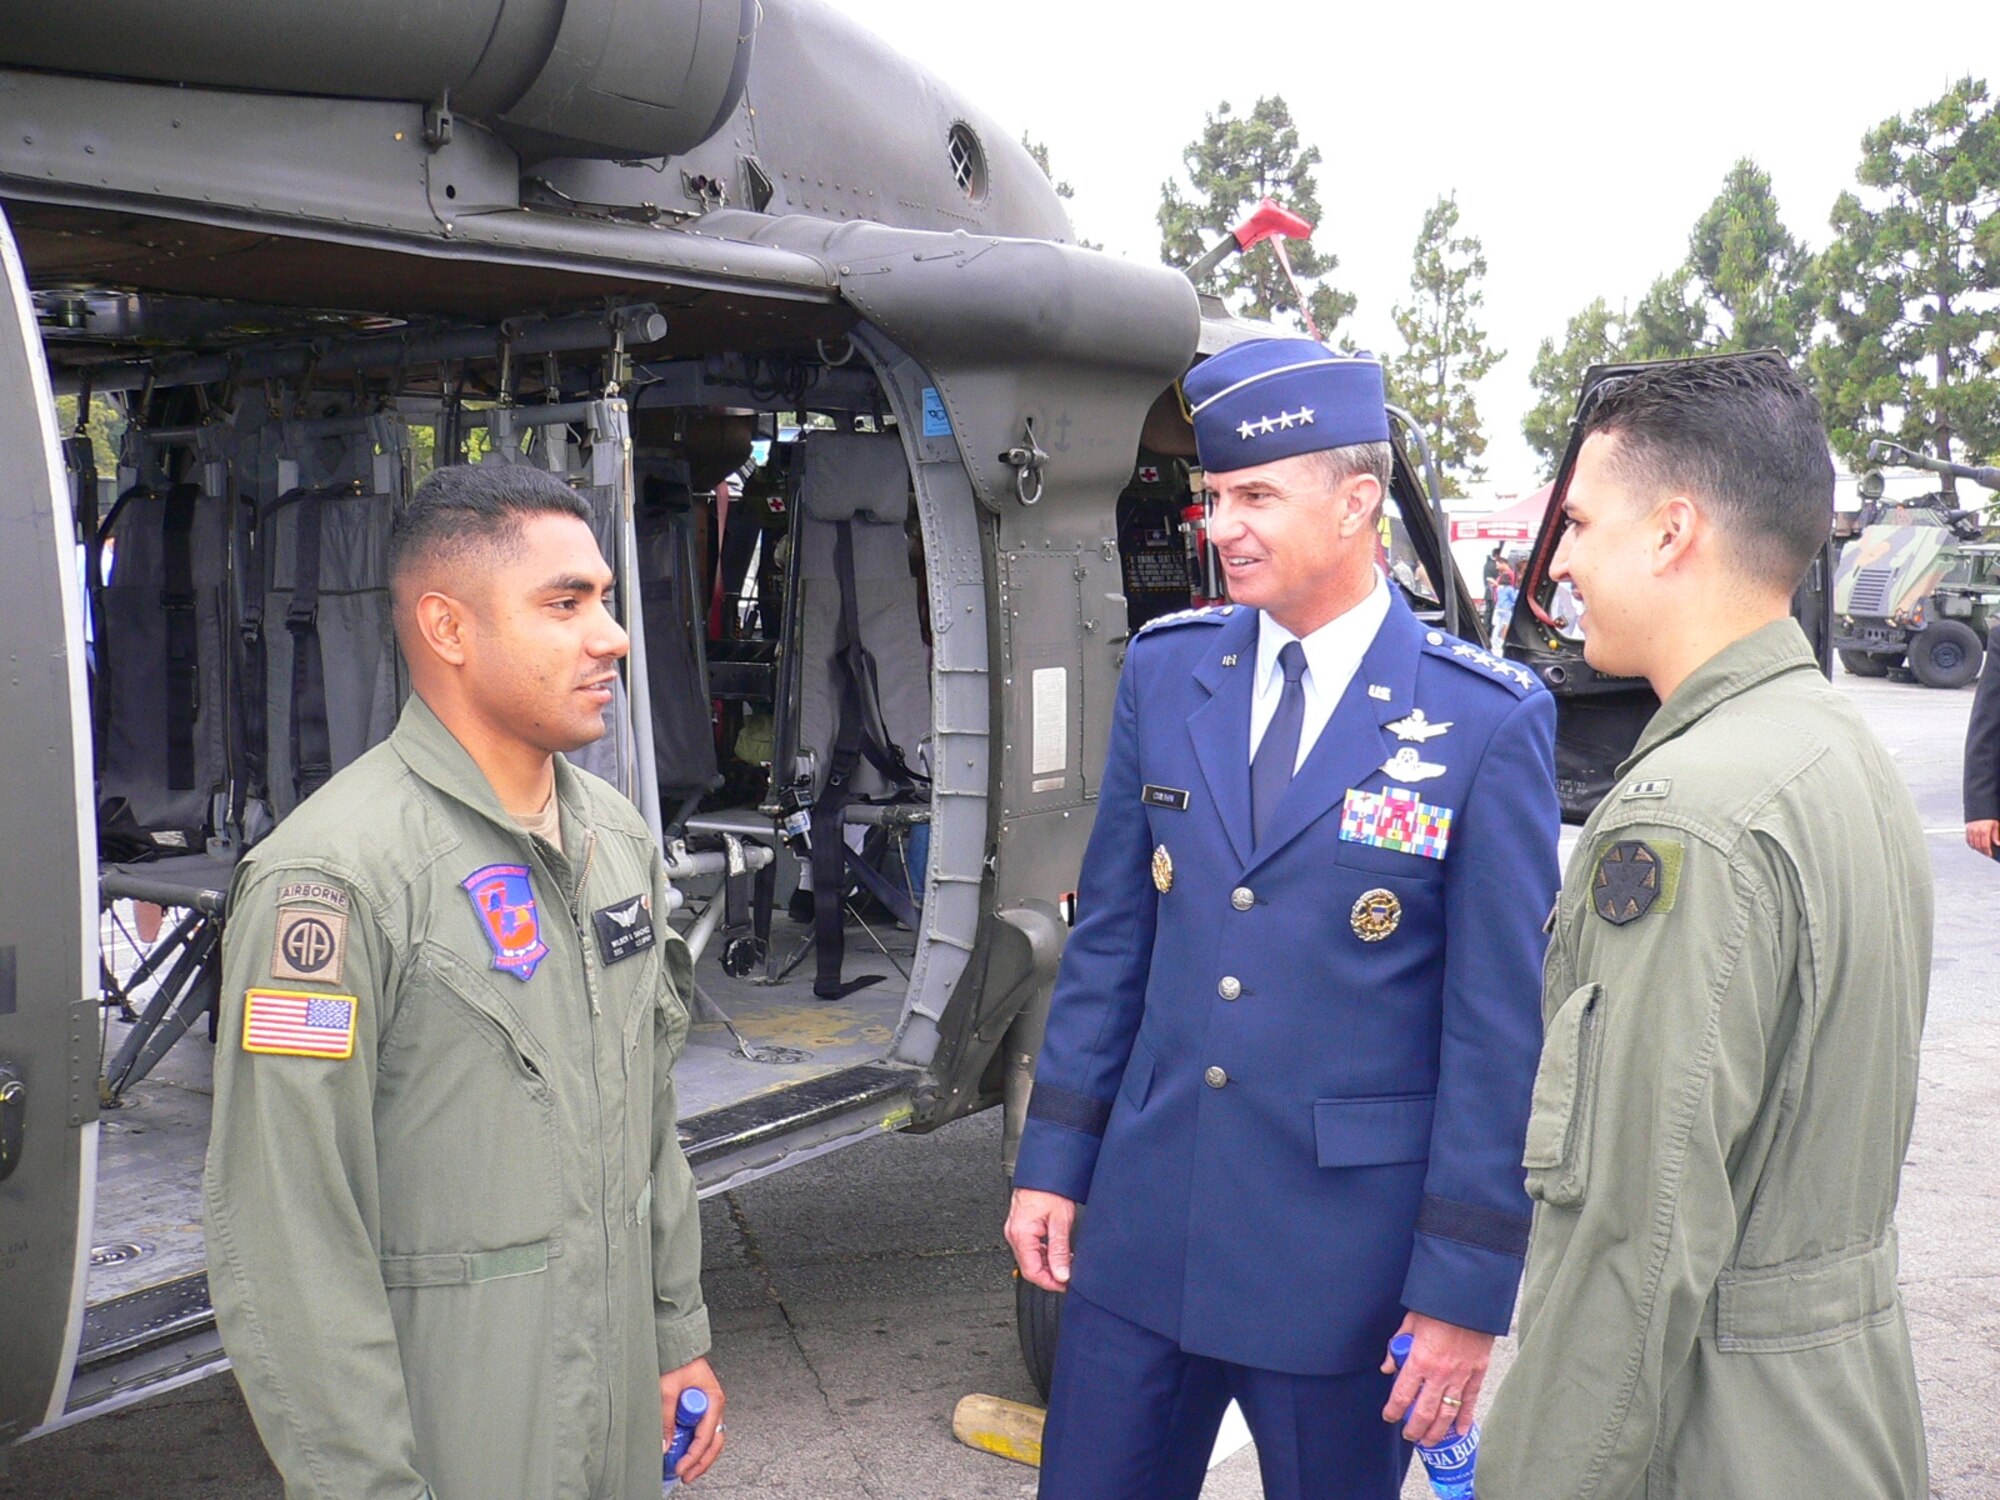 Gen. Kevin Chilton, Air Force Space Command commander, talks with soldiers at the Del Amo Mall. The mall was the site of numerous displays representing all Armed Forces as part of the 2007 Torrance Armed Forces Day celebration. The general served as the Grand Marshal for the parade. A Los Angeles AFB honor guard led the way as Los Angeles, Edwards, and Vandenberg Air Force Bases and March Air Reserve Base marched passed the crowds with a total of more than 300 airmen participating. 
